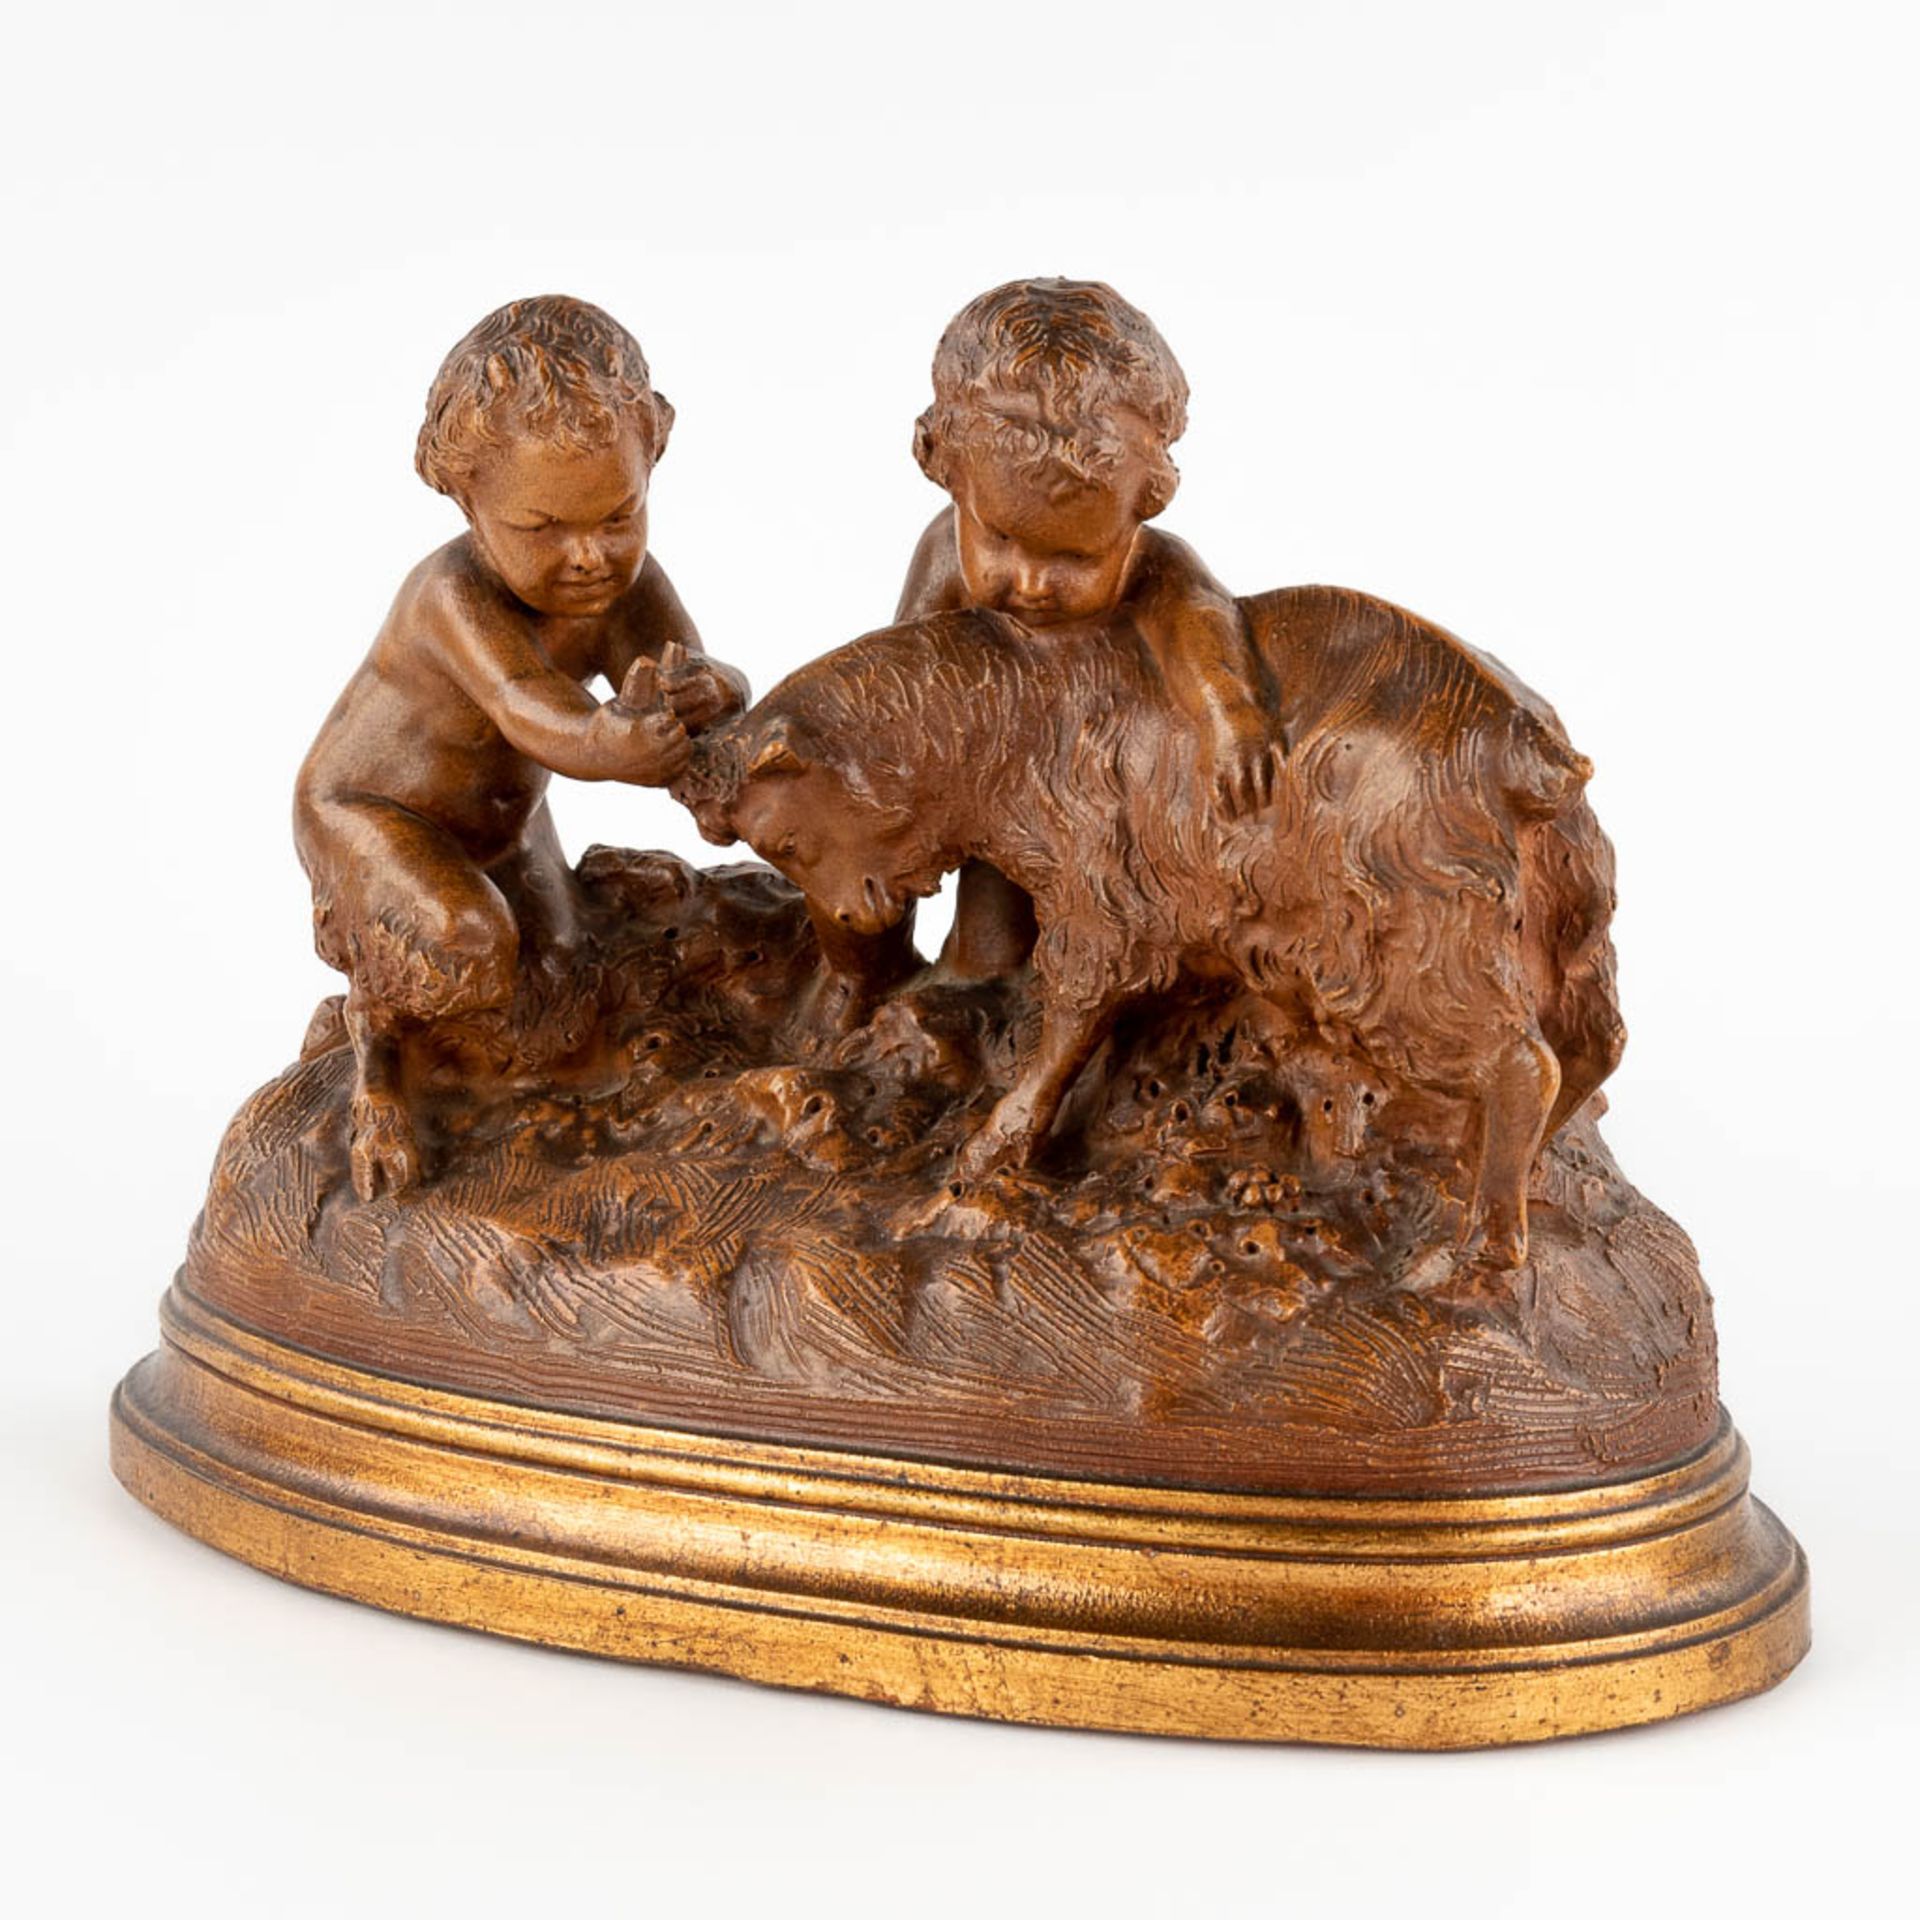 Giuseppe D'ASTE (1881-1945) 'Two satyrs with a goat' patinated terracotta. (L:22 x W:40 x H:28 cm) - Image 3 of 12